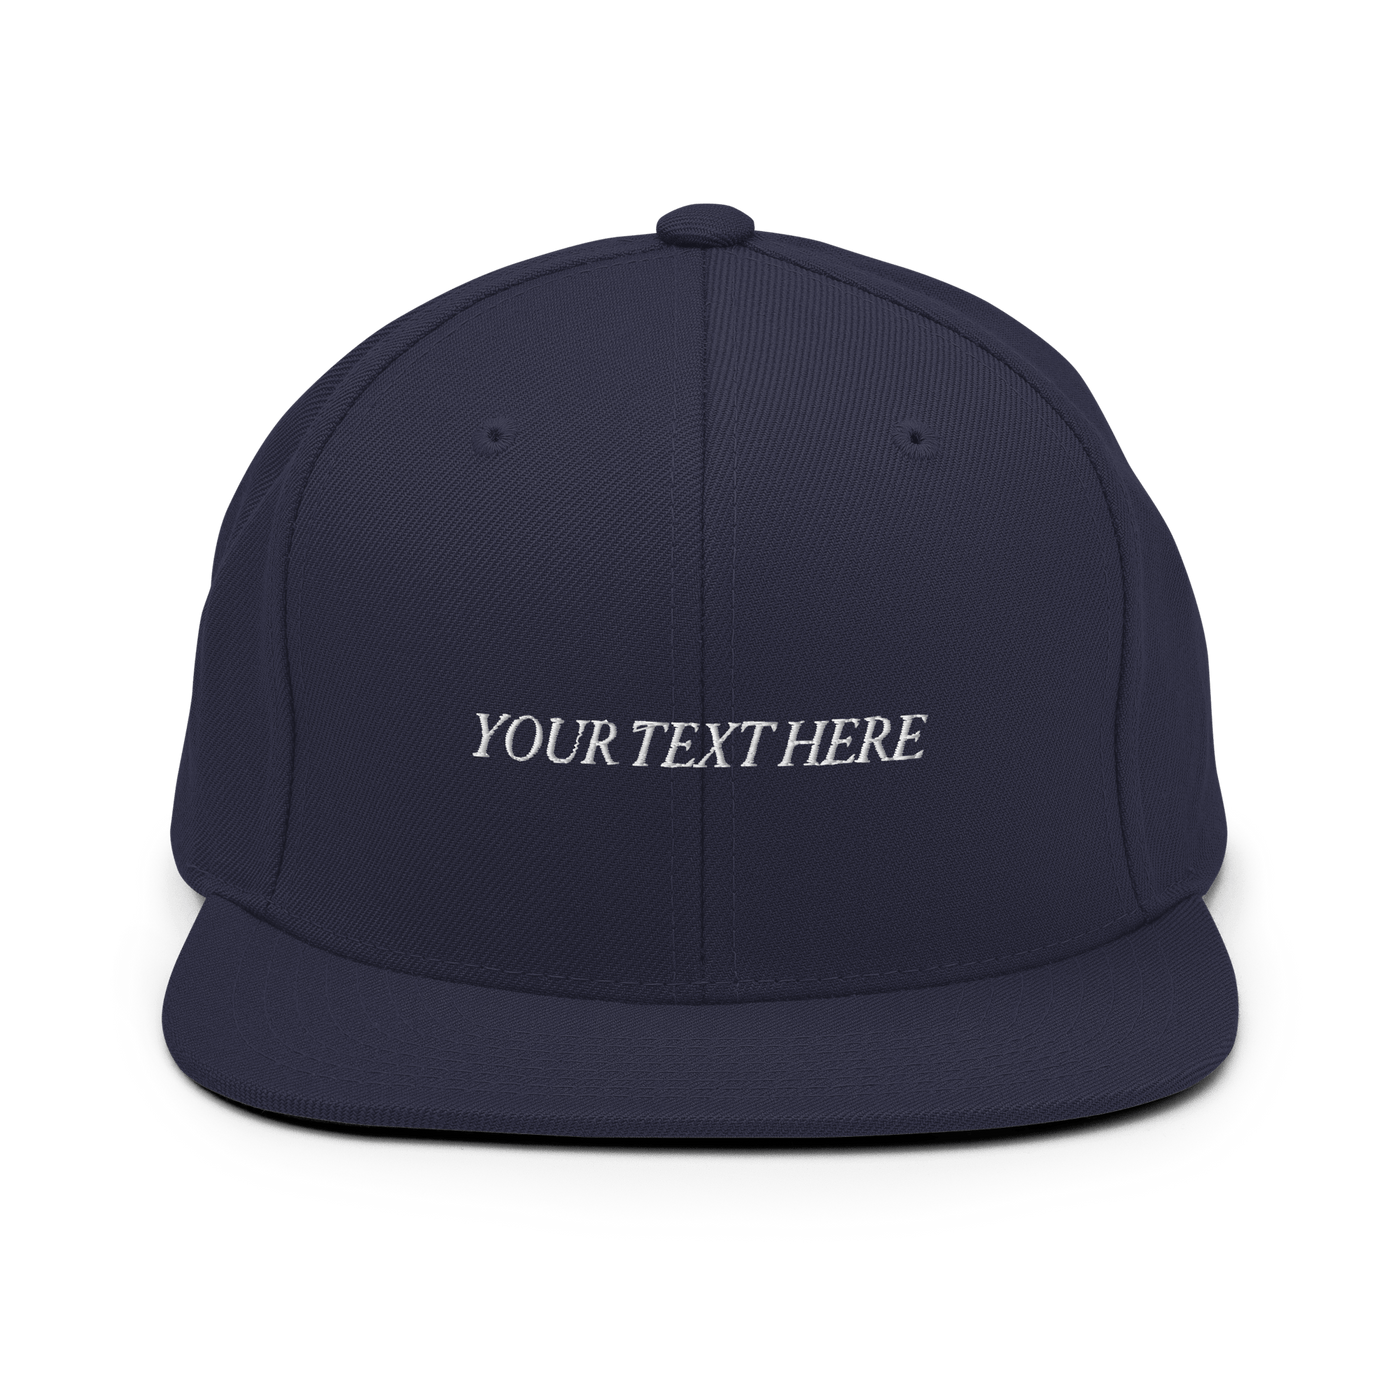 Customize Your Own Snapback Hat - Italic Font - Navy - - Just Another Cap Store